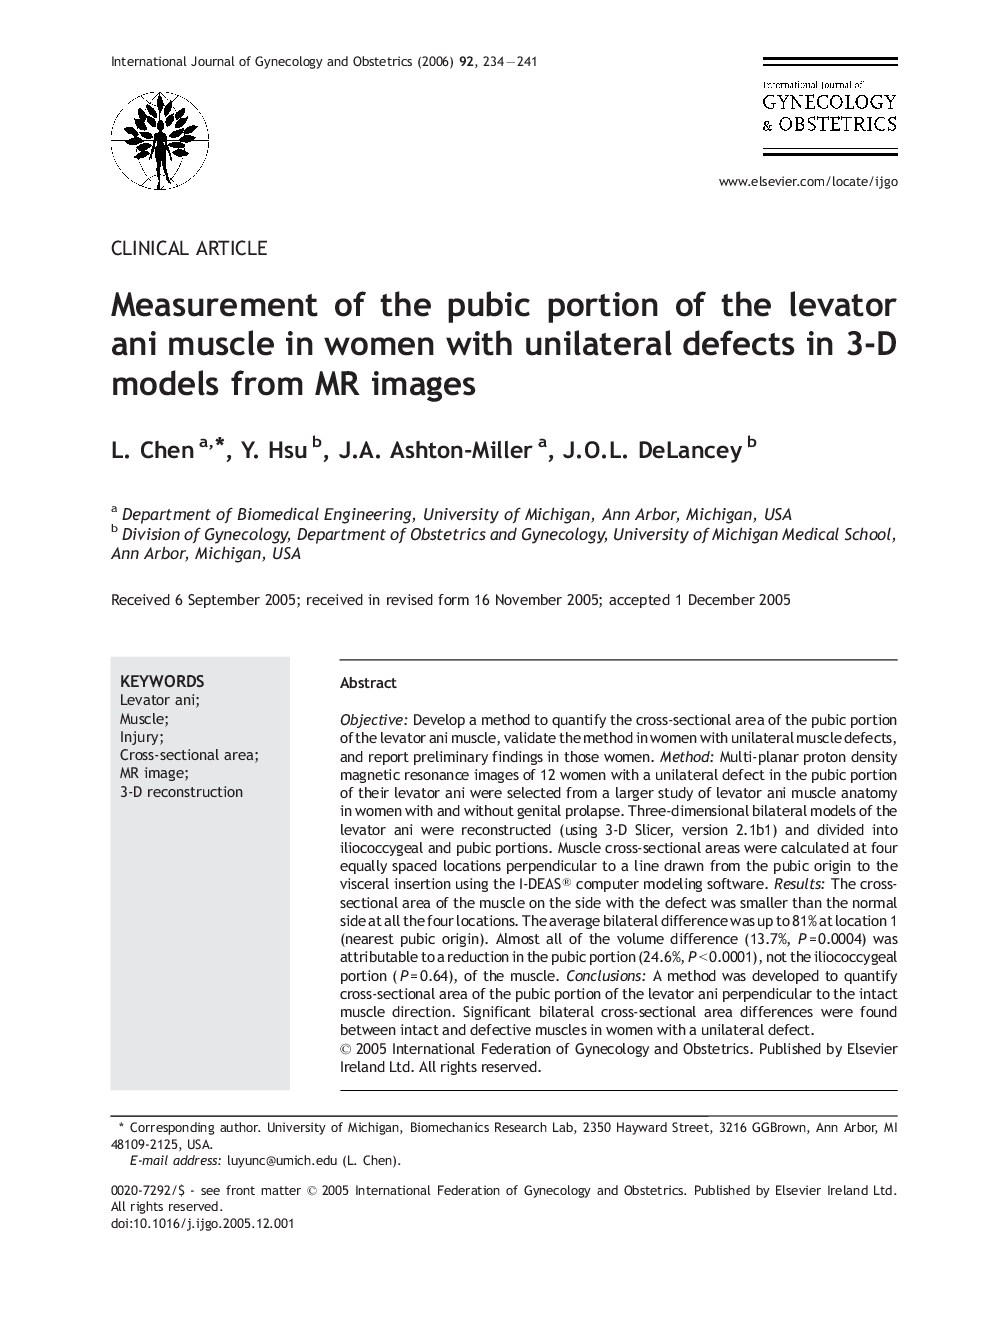 Measurement of the pubic portion of the levator ani muscle in women with unilateral defects in 3-D models from MR images